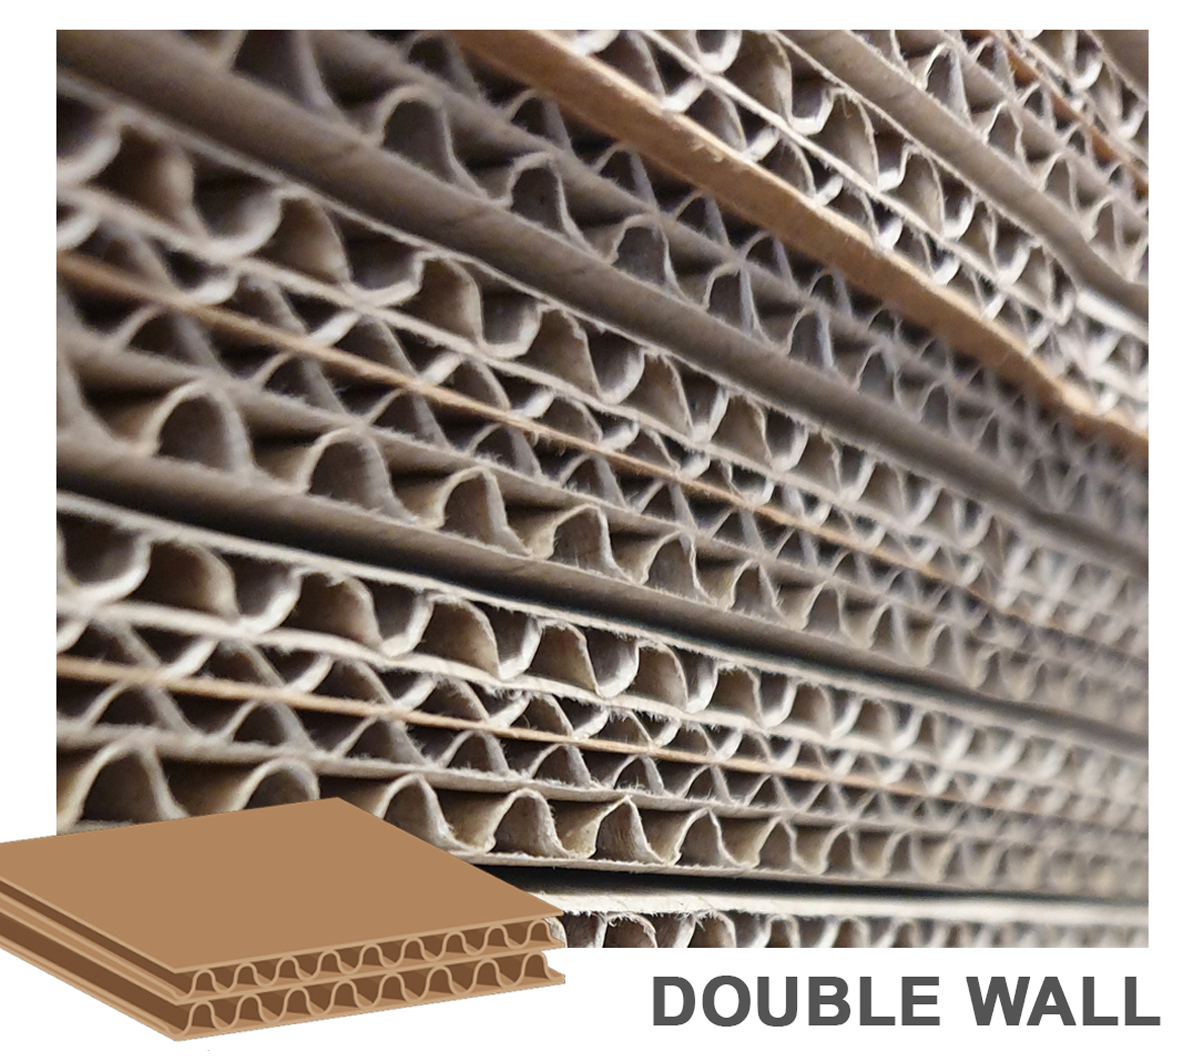 DOUBLE WALL BOXES